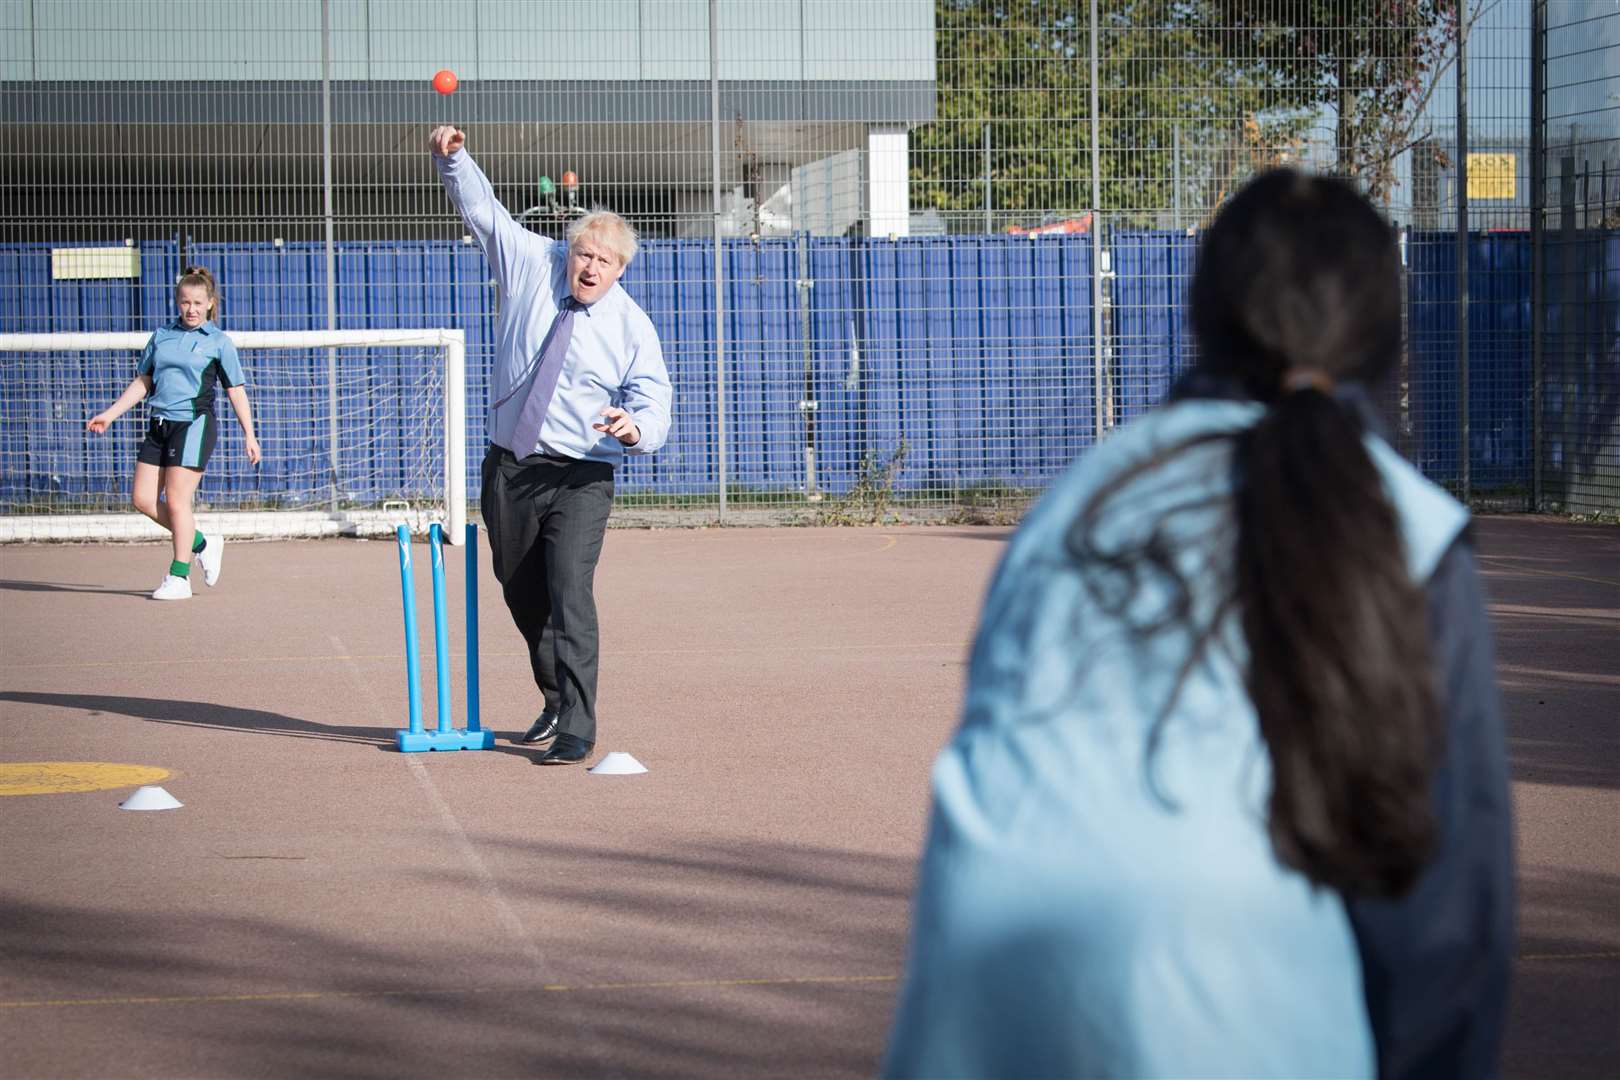 Taking part in a game of cricket during a sports lesson on a visit to Ruislip High School in September (Stefan Rousseau/PA)